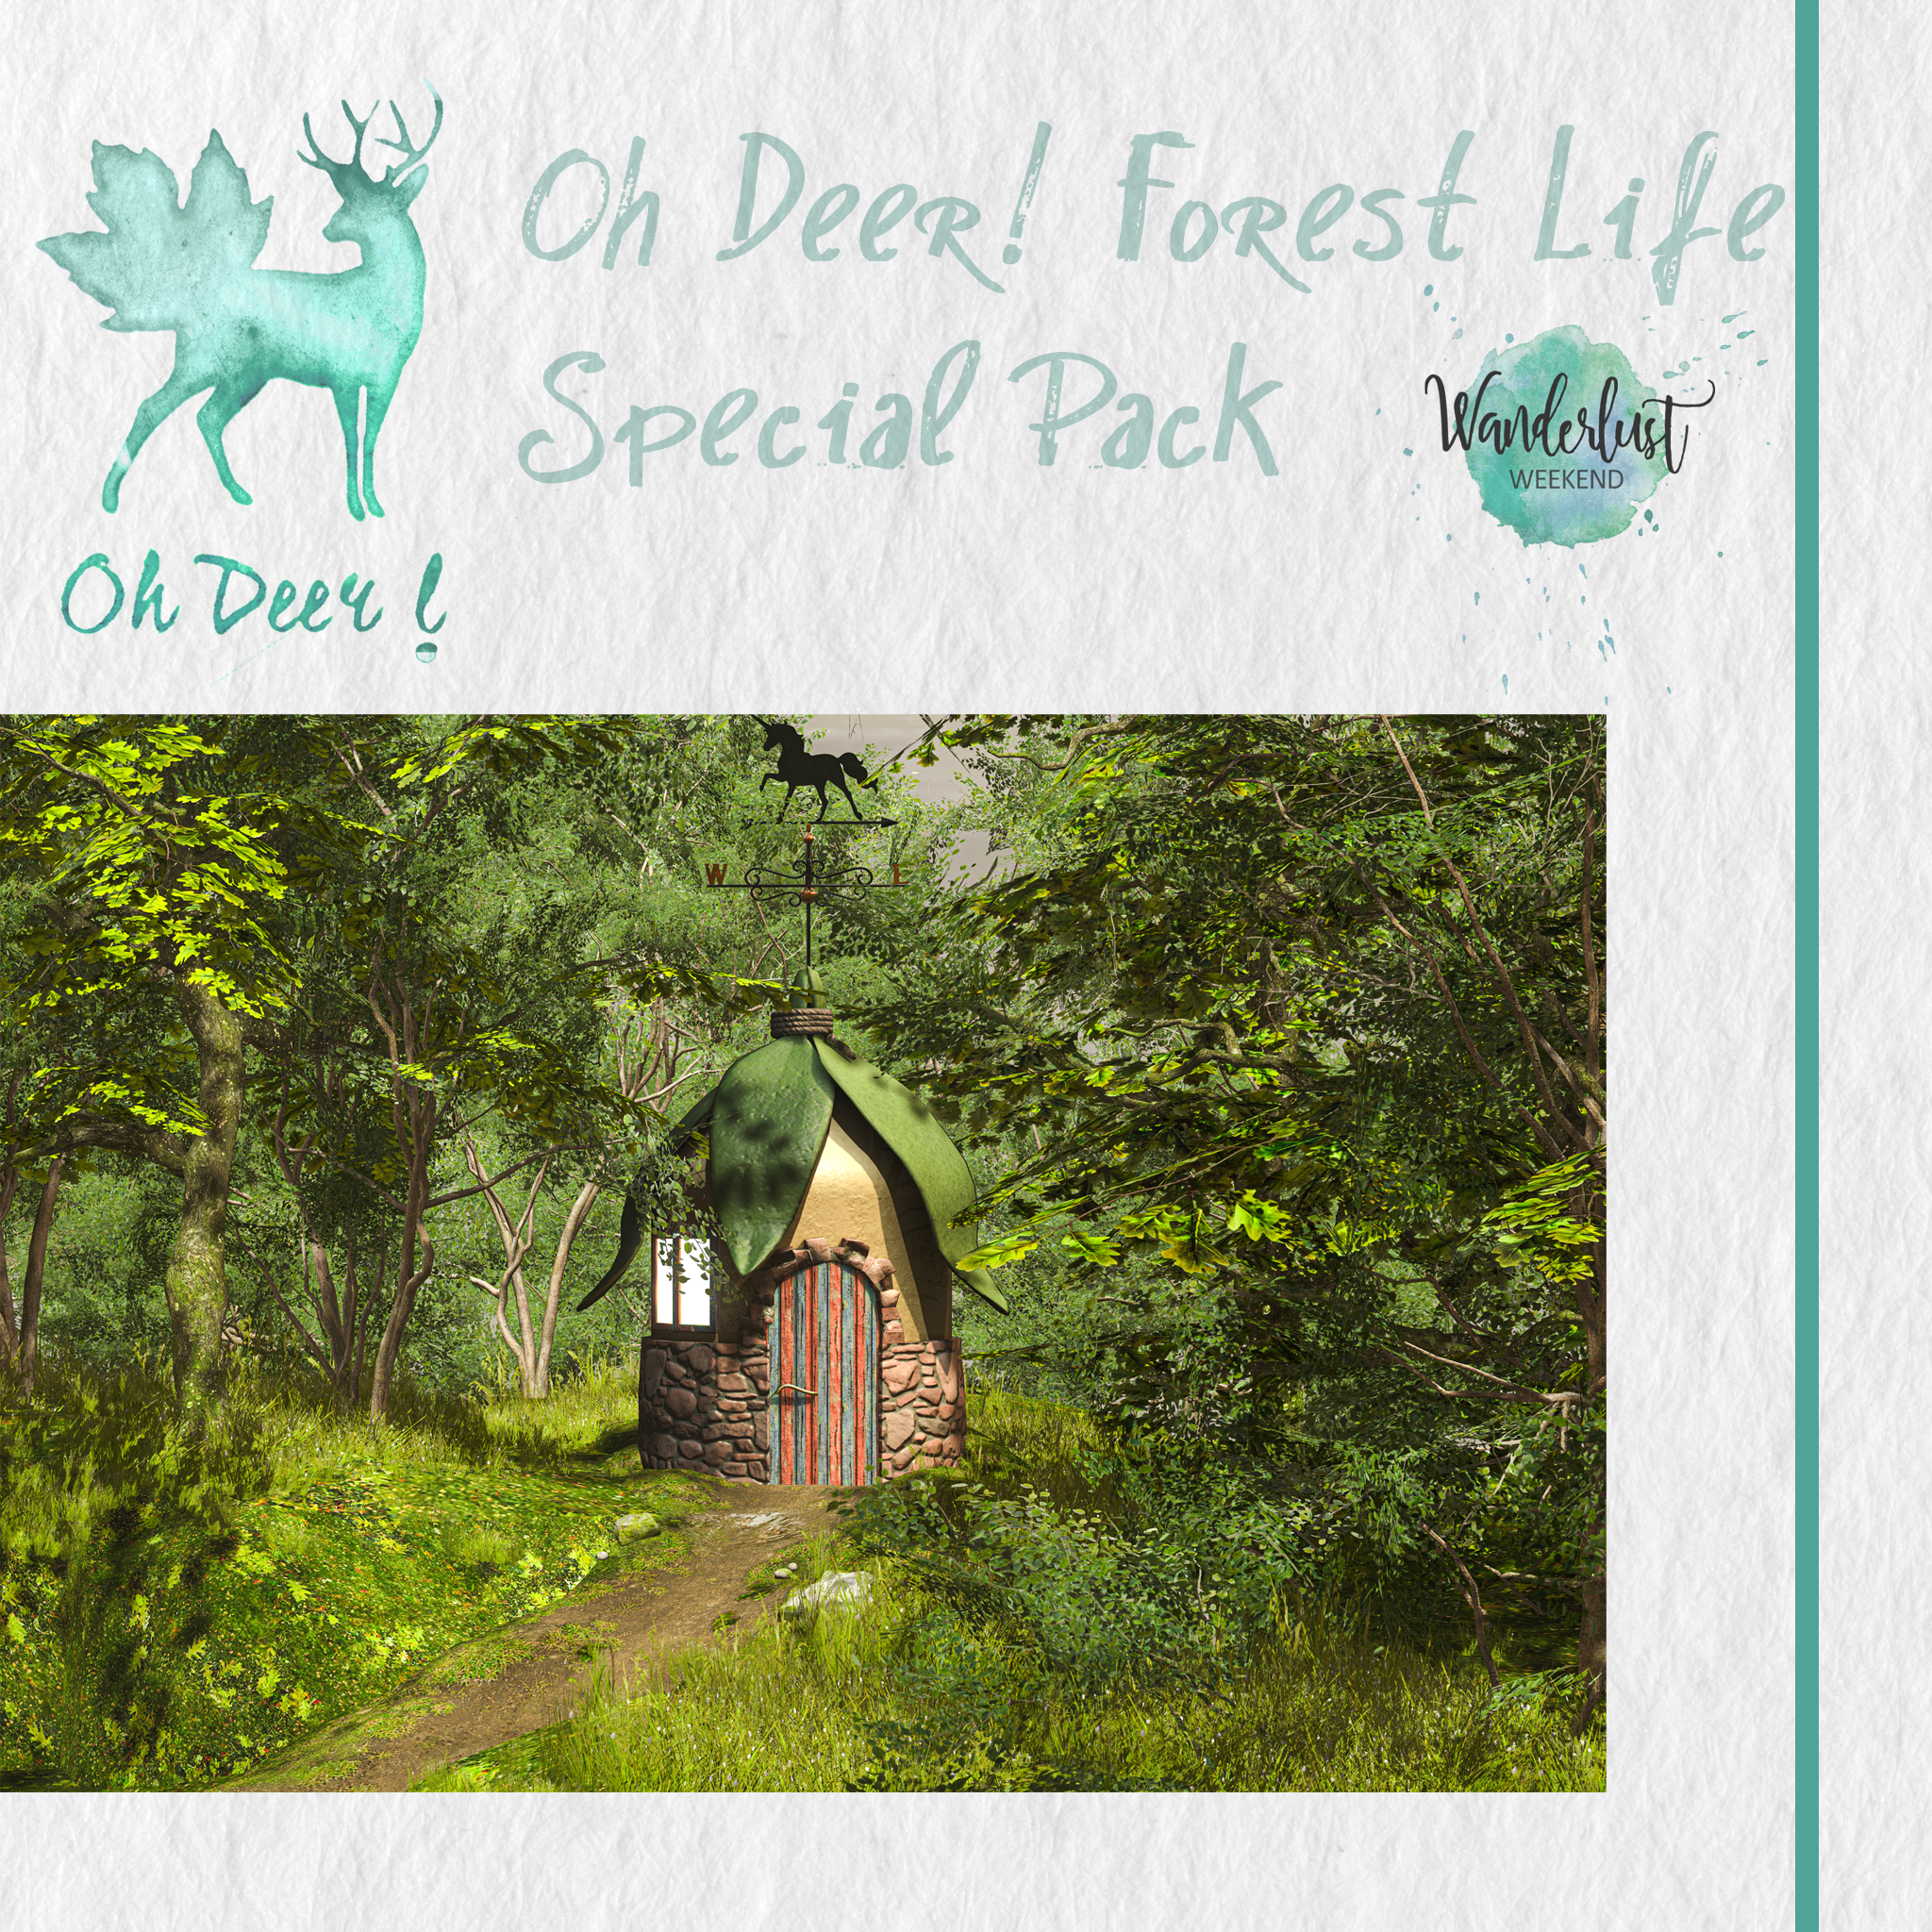 Oh Deer – Forest Life Special pack